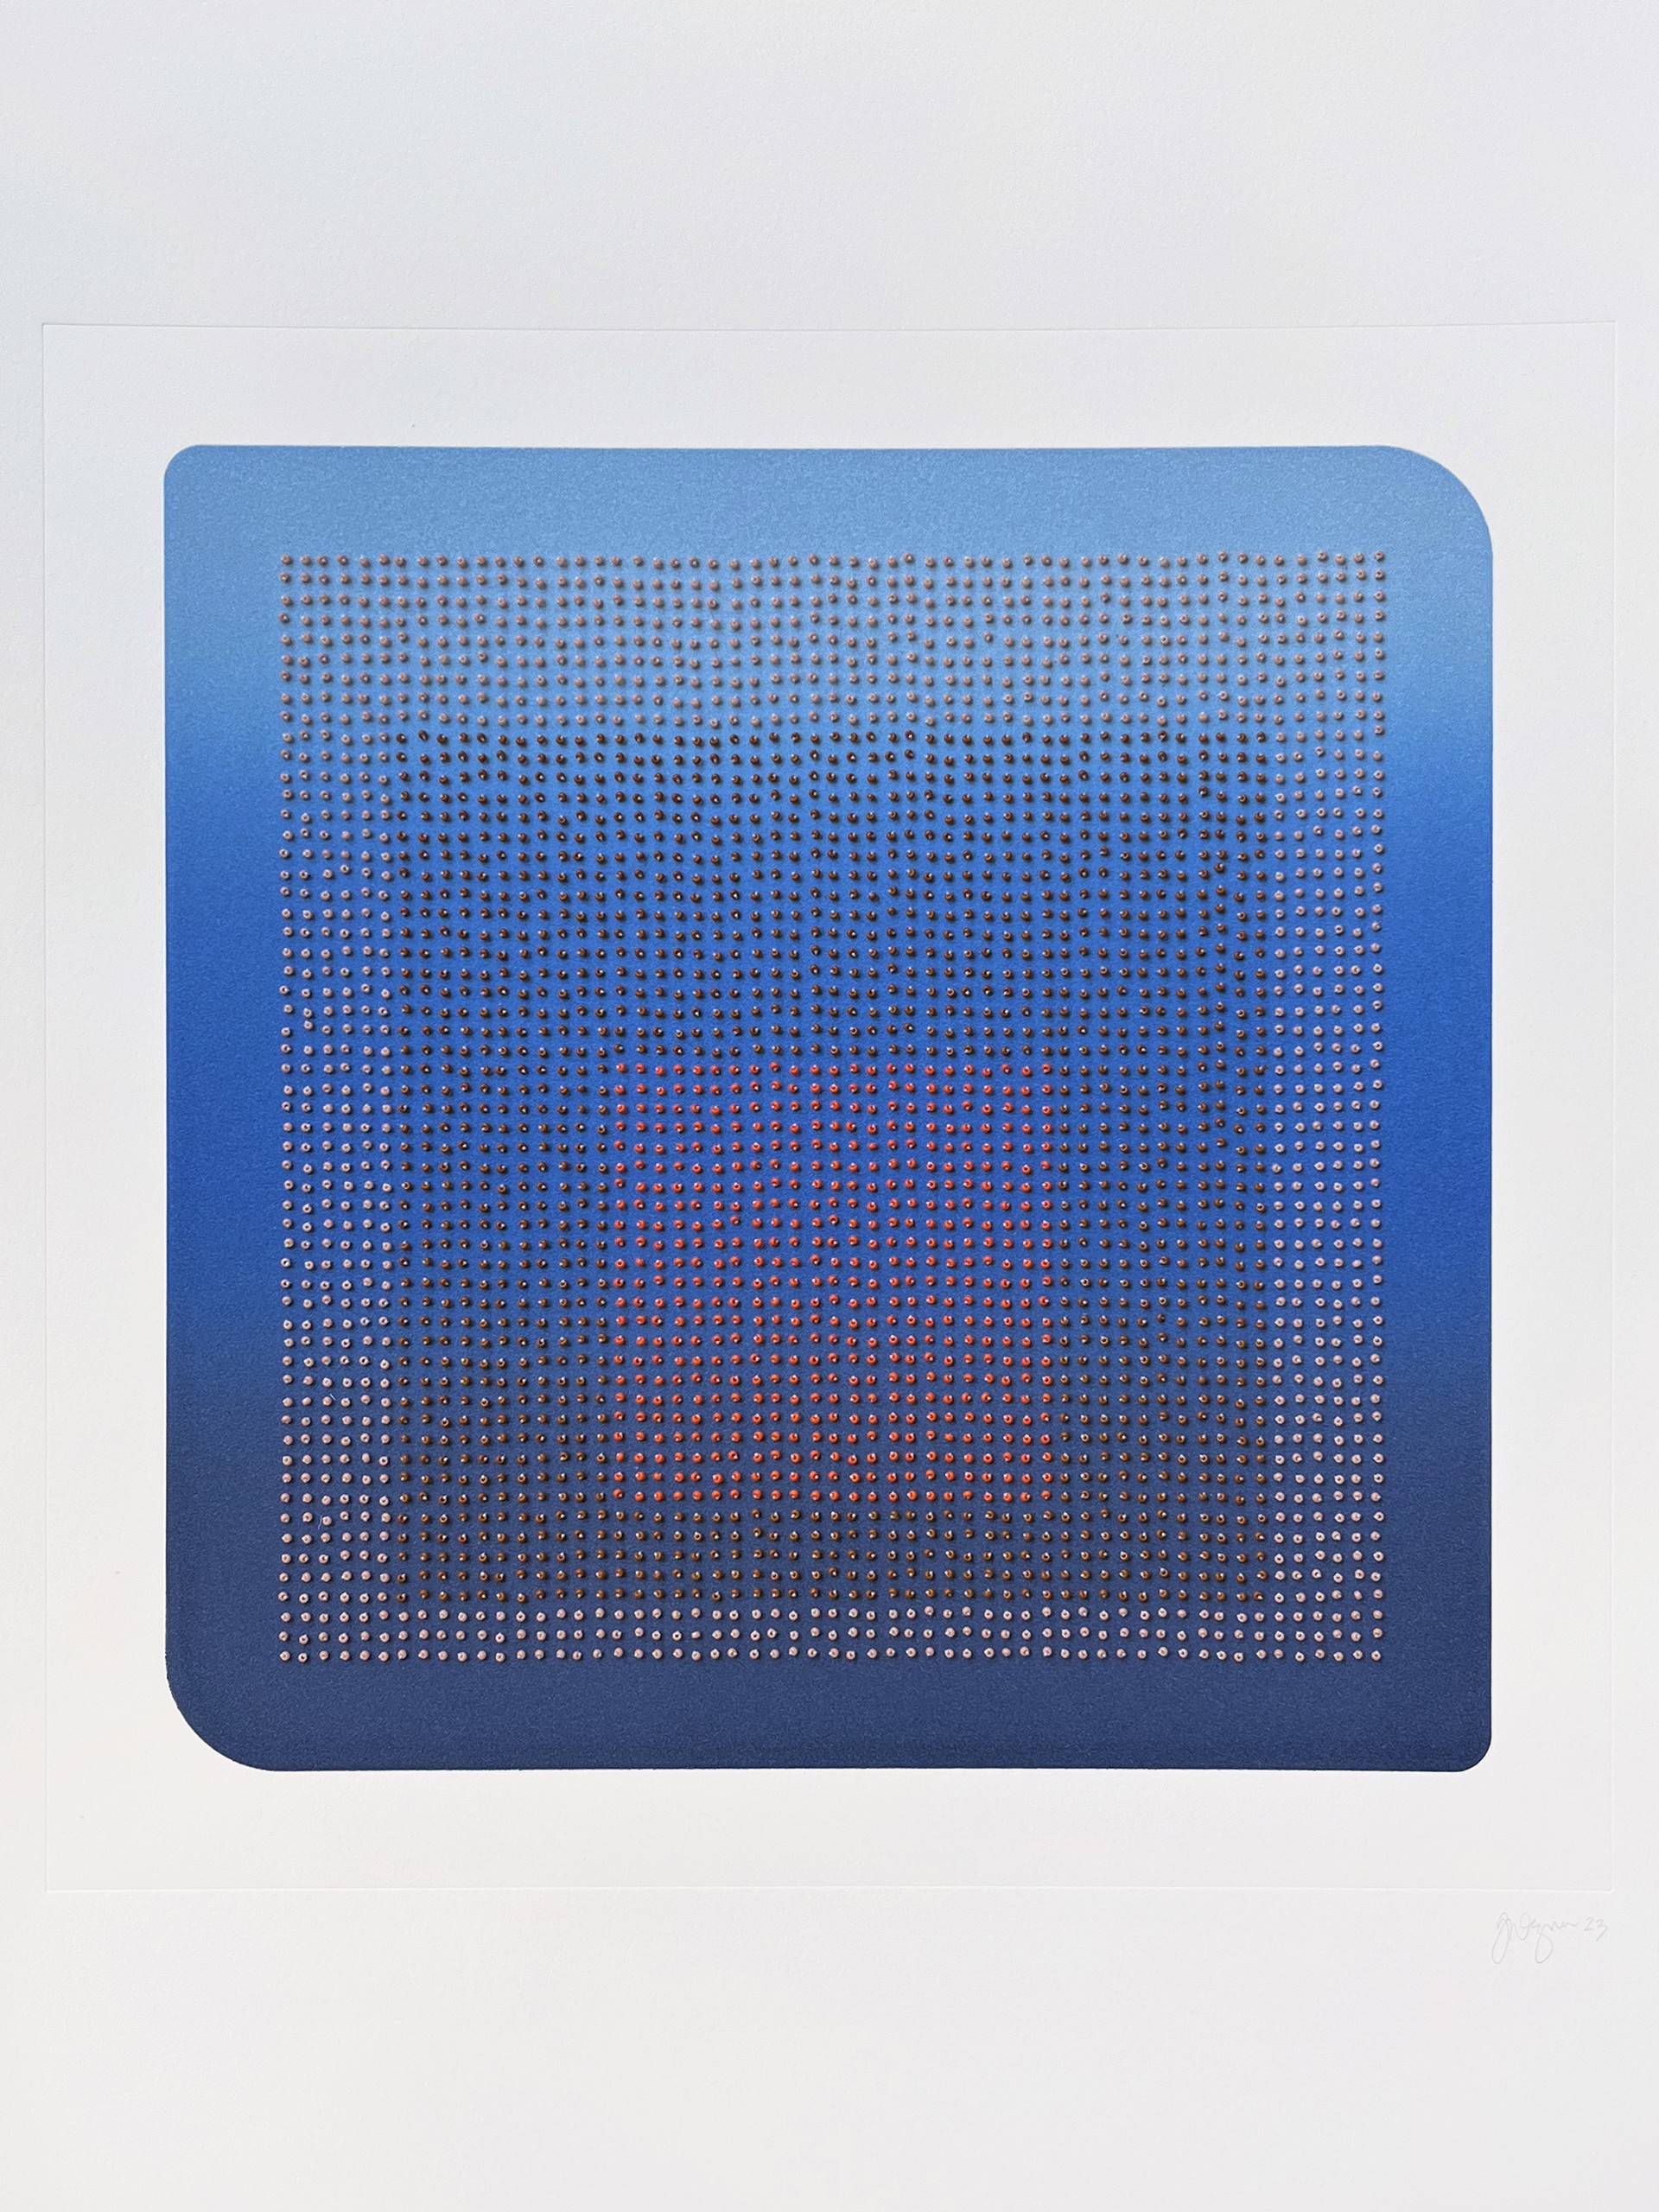 Homage to Albers (Blue) by Gretchen Wagner